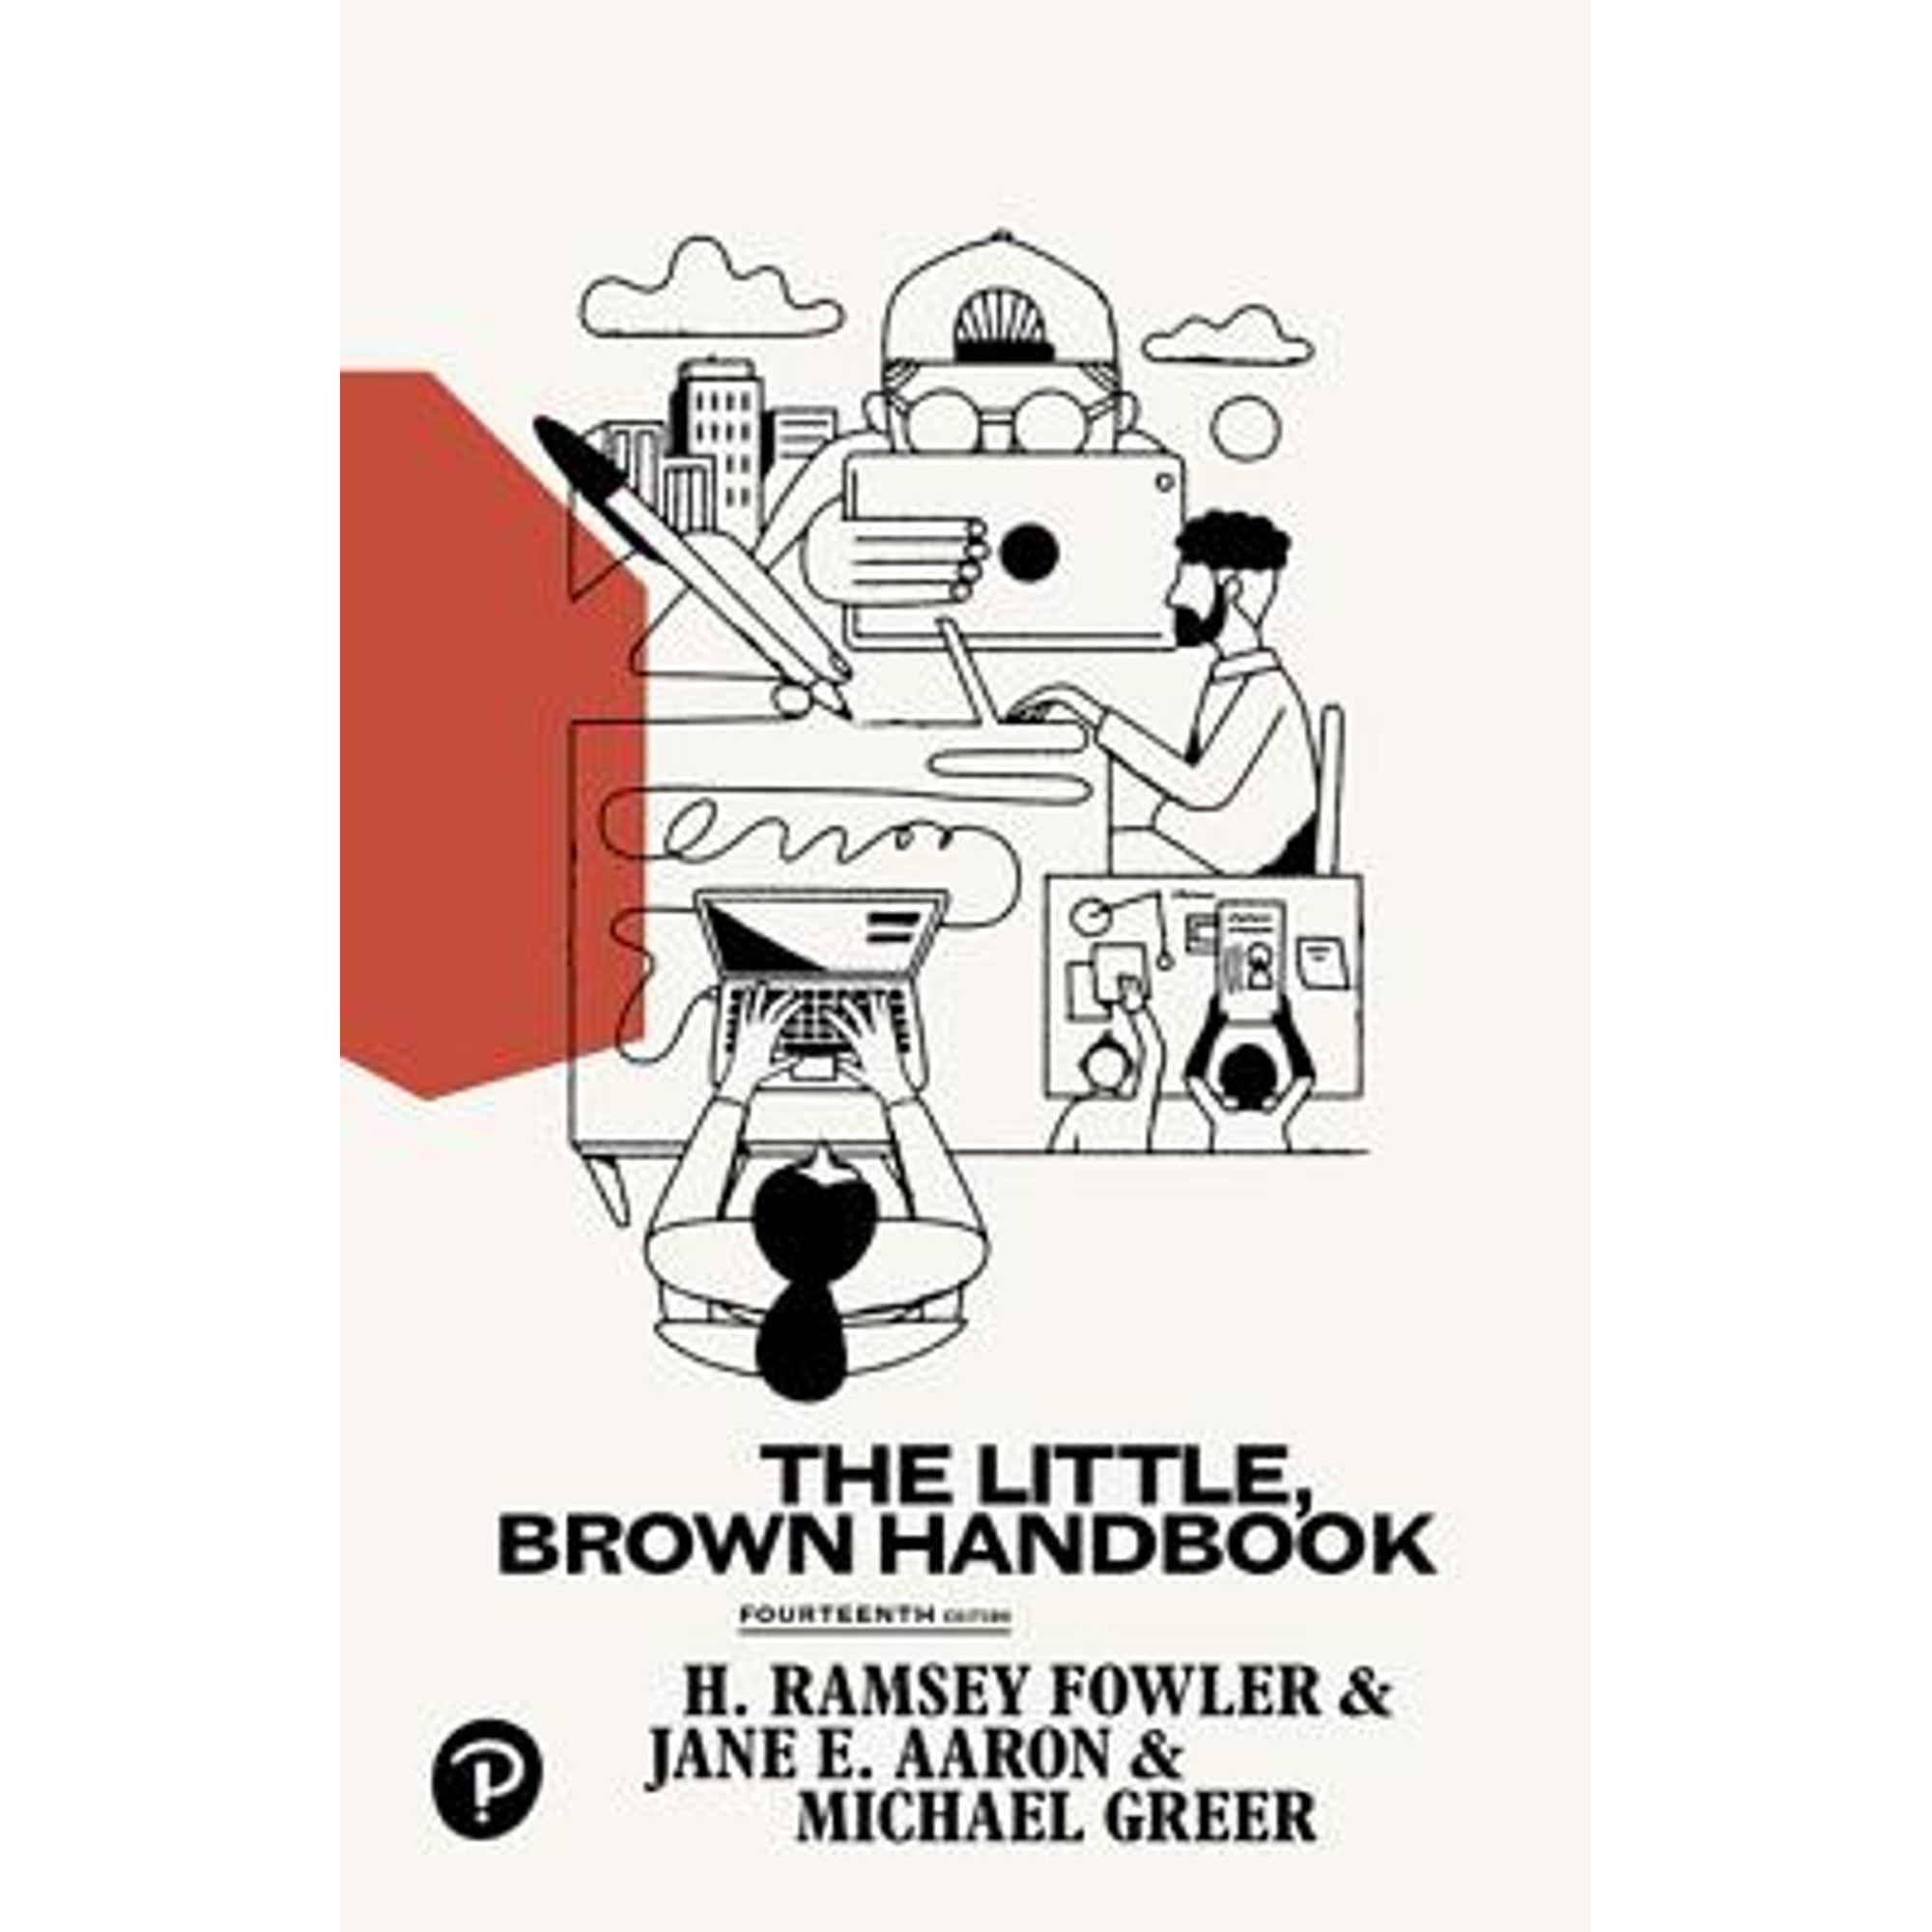 Pre-Owned The Little, Brown Handbook (Paperback 9780134759722) by H Ramsey Fowler, Jane E Aaron, Michael Greer